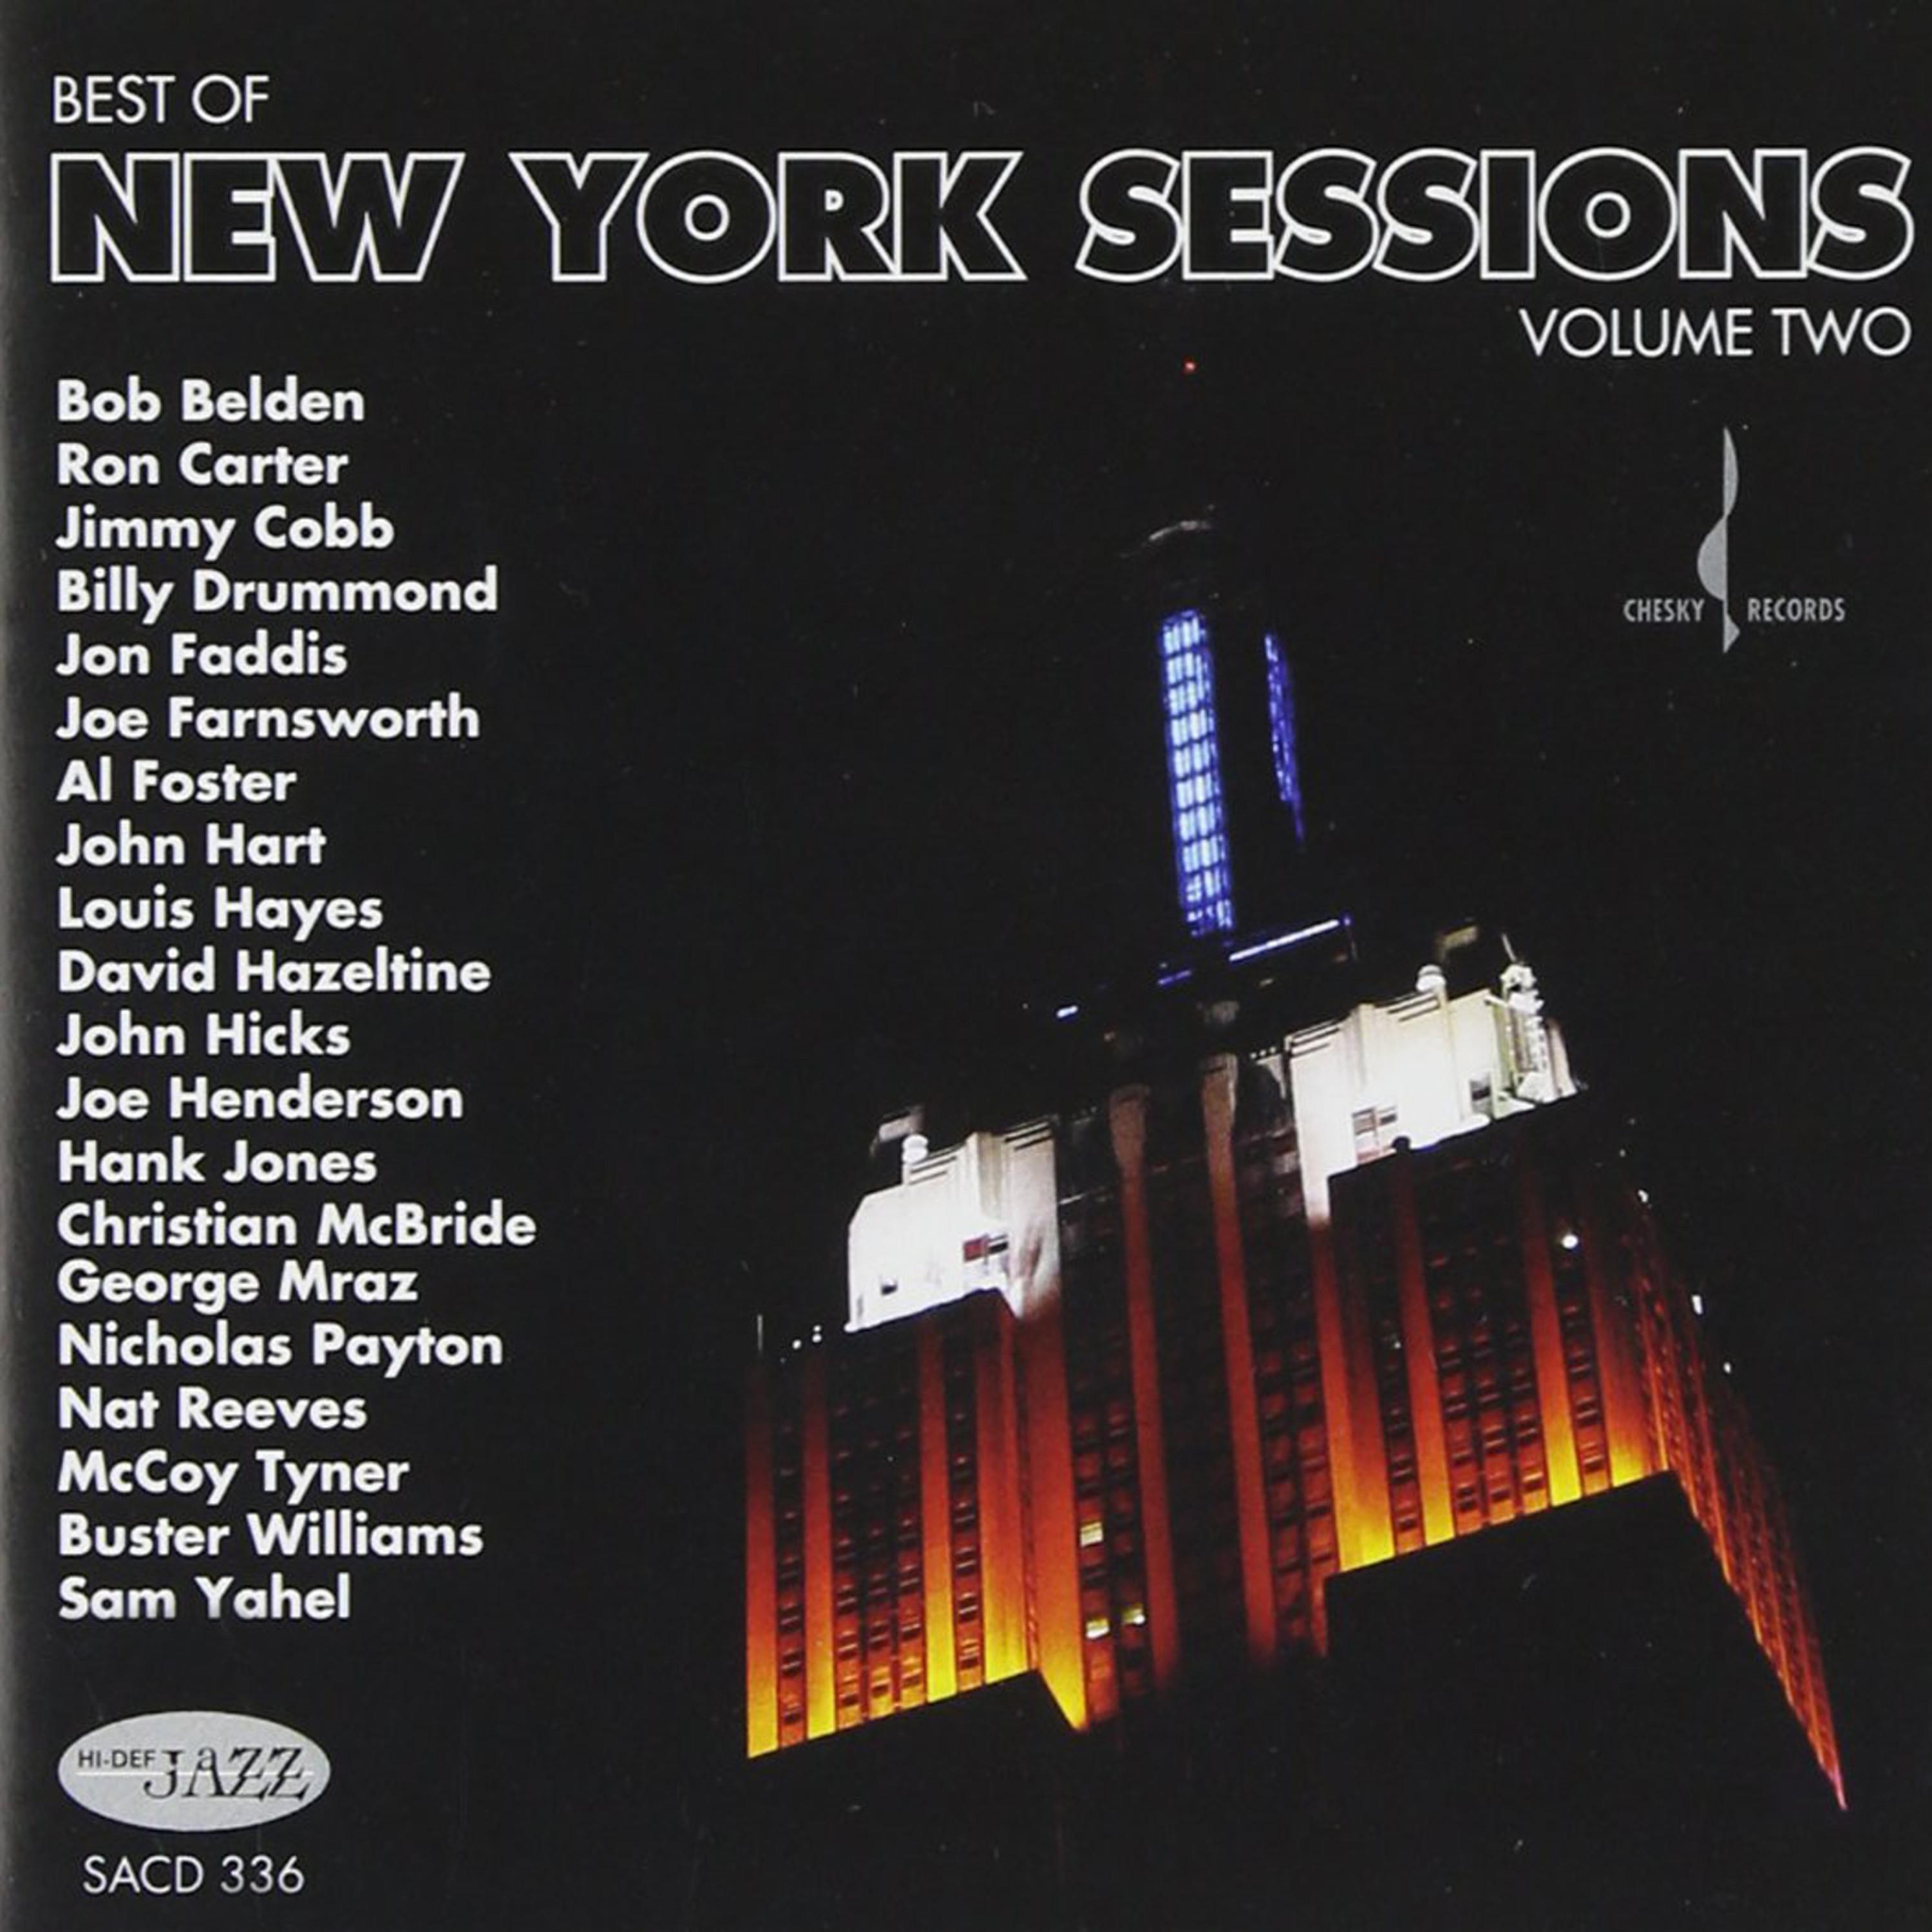 The Best of New York Sessions, Vol. 2